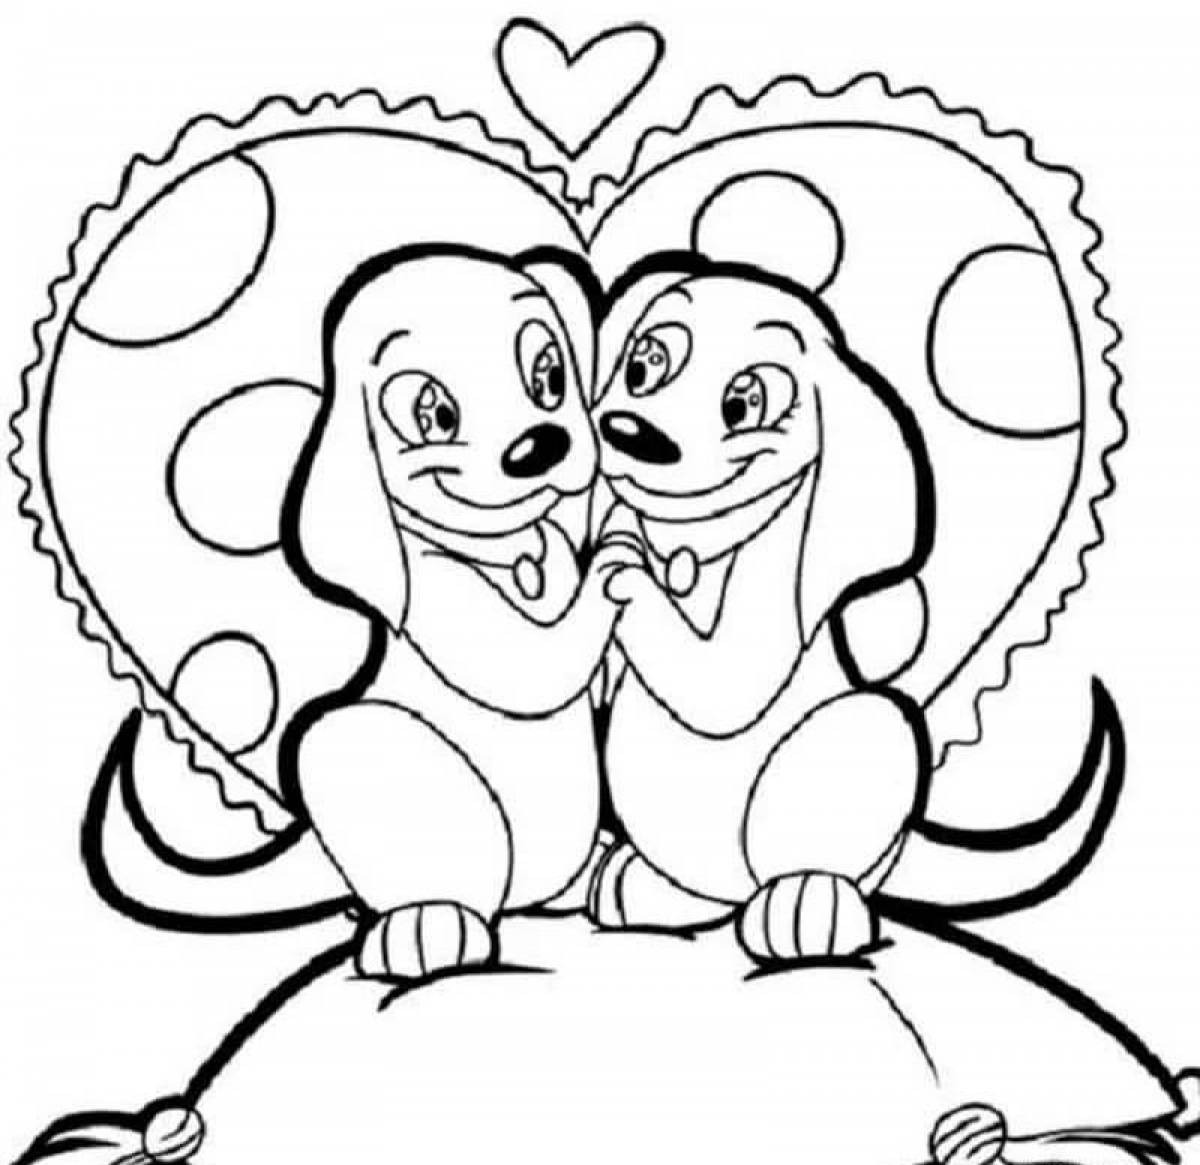 Sky love coloring page